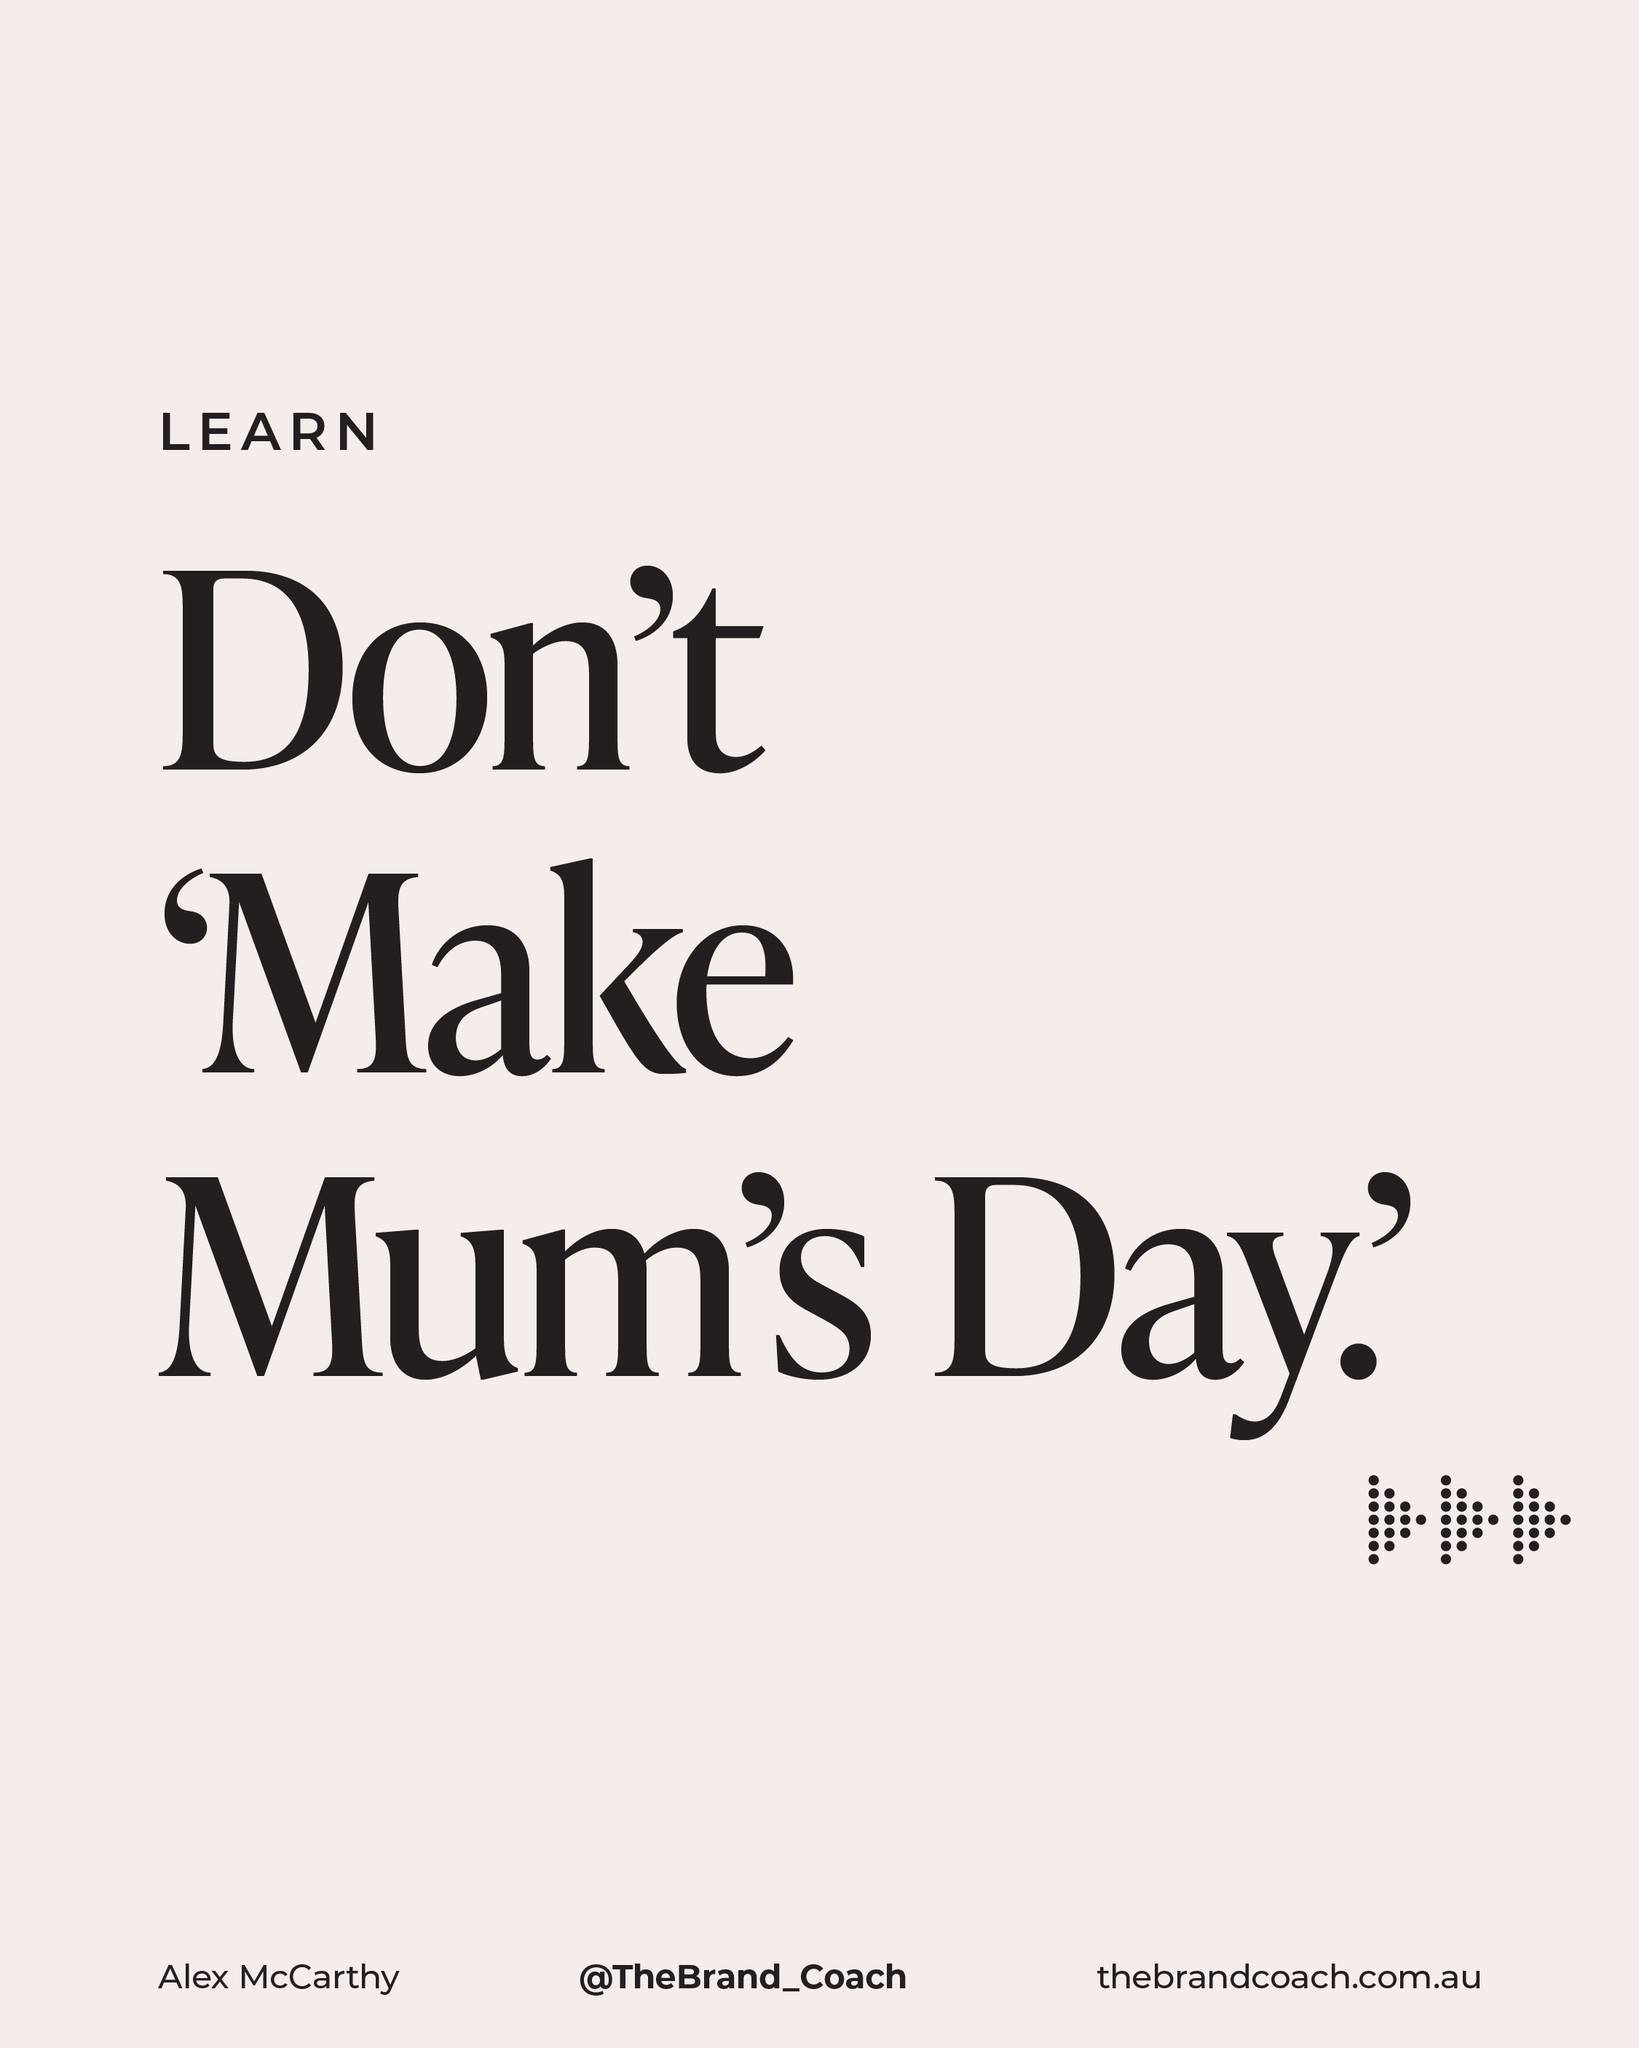 Special occasions bring out the best in clich&eacute; copywriting 👀

Working in promotional marketing for years has made me the queen of clich&eacute; headlines! In fact, I once wrote and designed an entire Mother's Day in-store promotion for Bailey